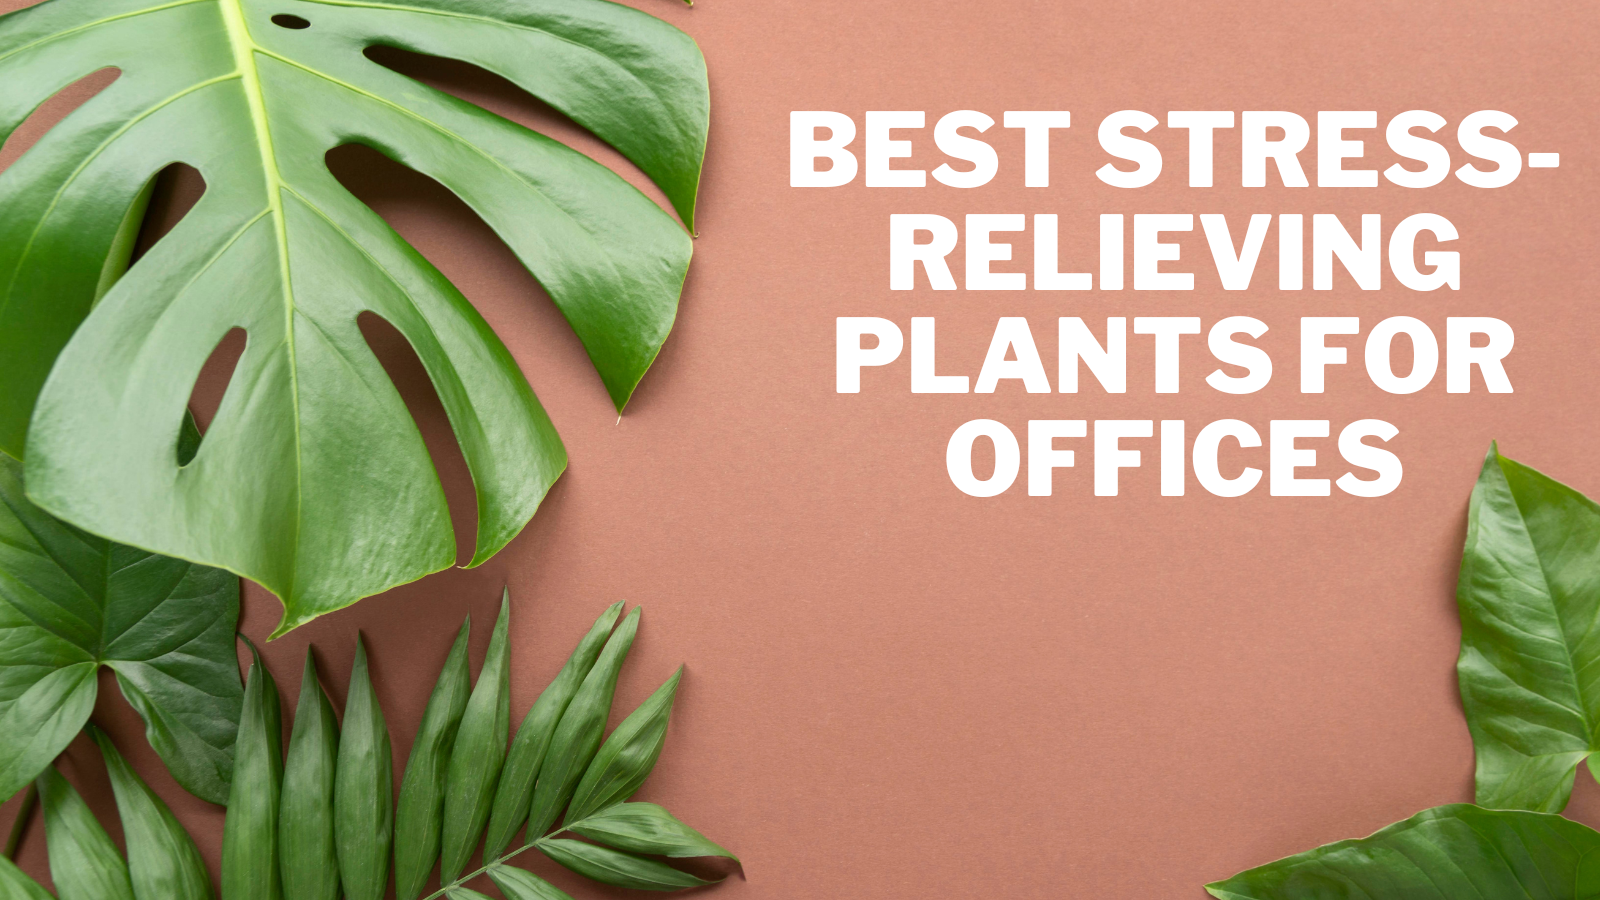 Best Stress-Relieving Plants For Offices